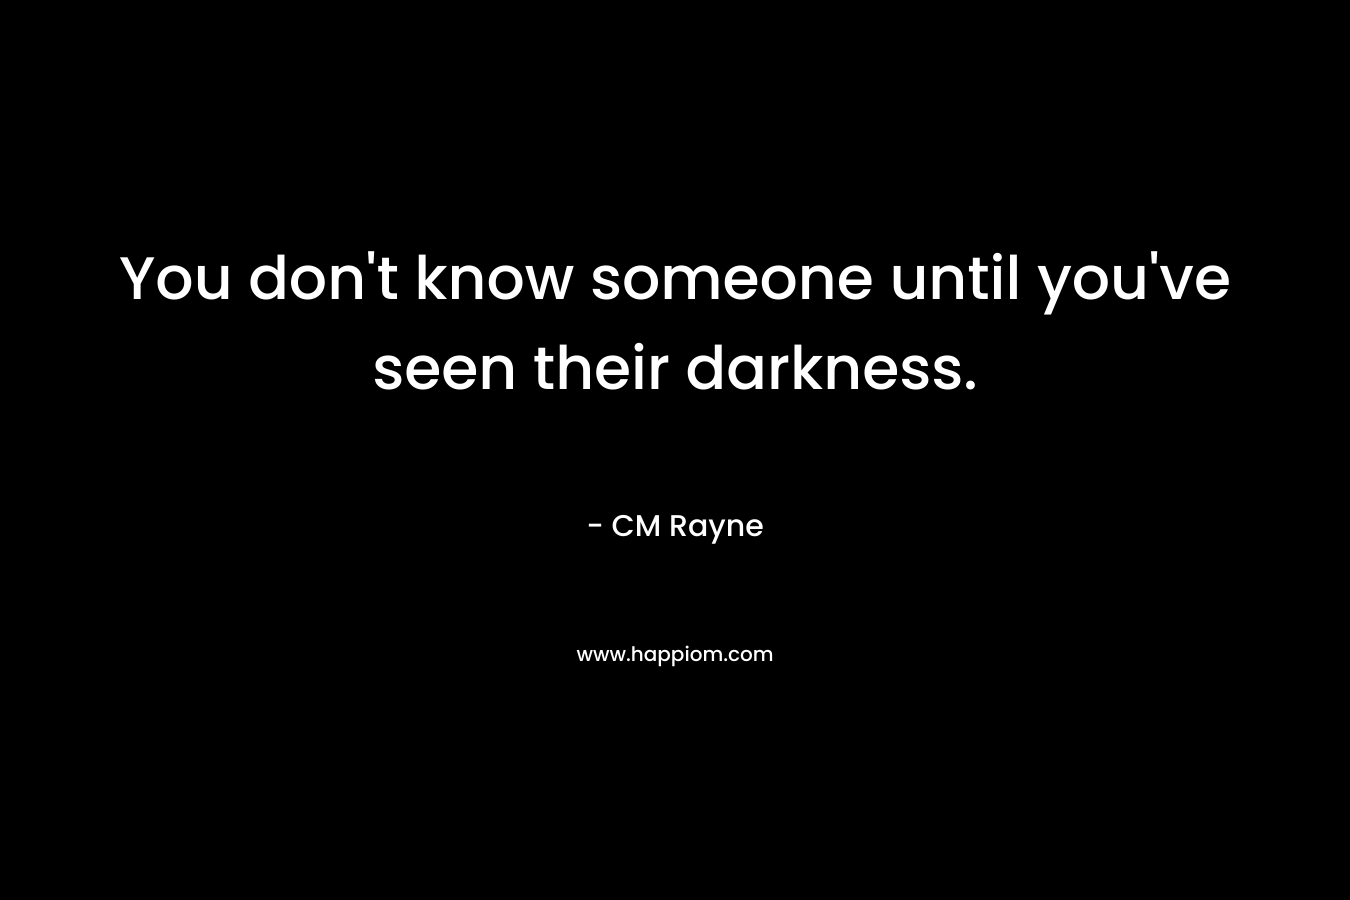 You don't know someone until you've seen their darkness.